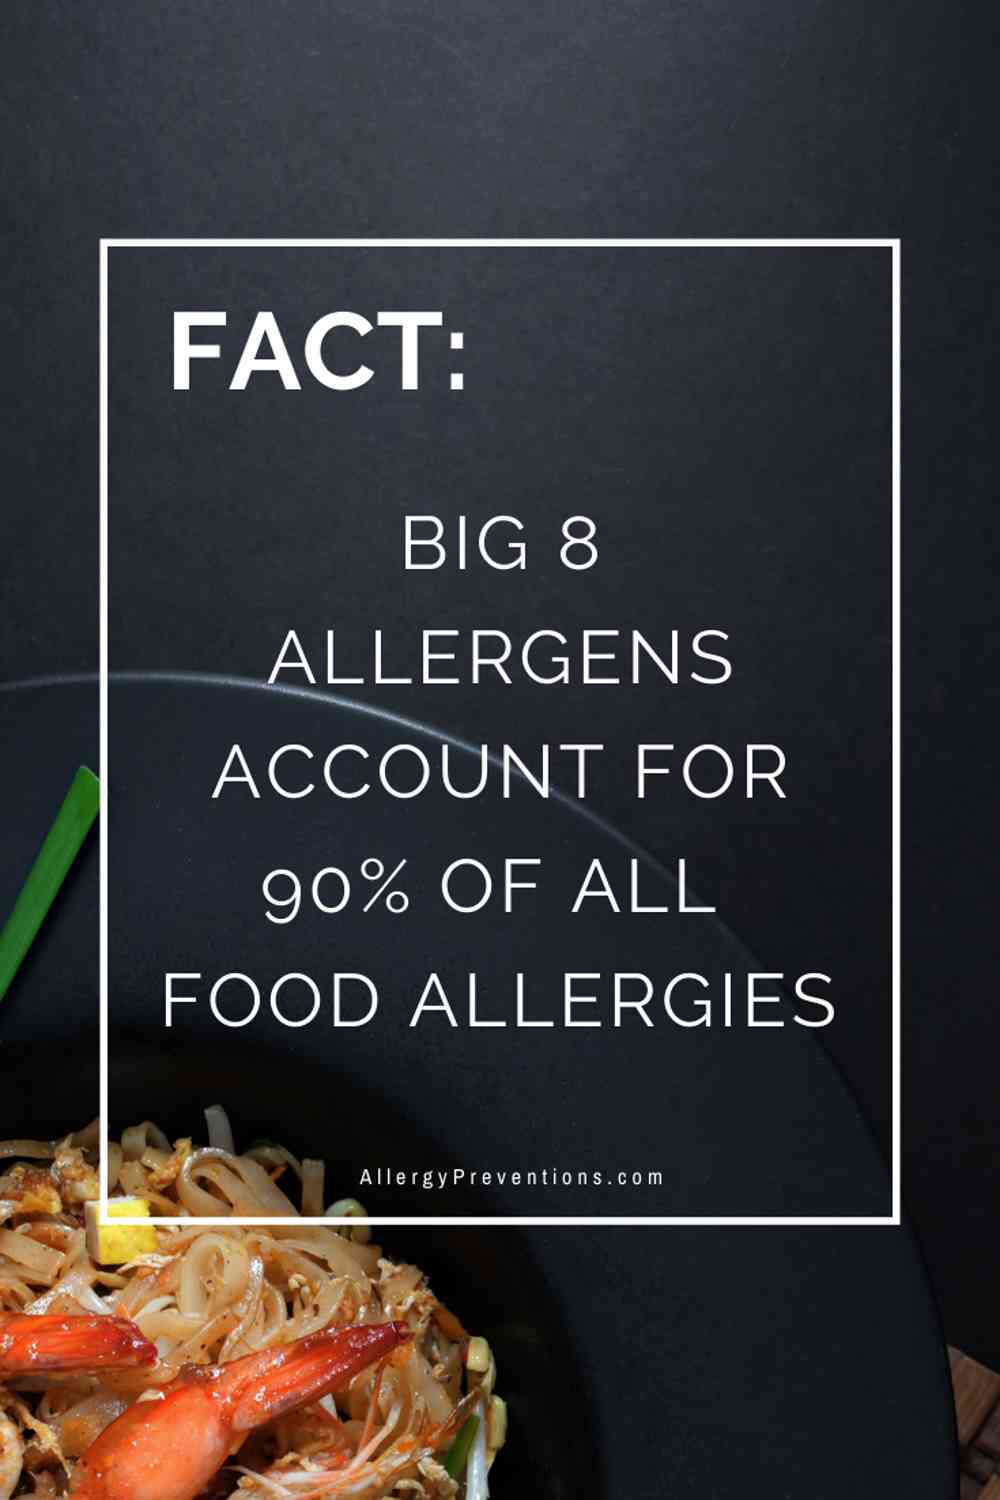 fact infographic stating: big 8 allergens account for 90% of all food allergies. visual provided by allergypreventions.com